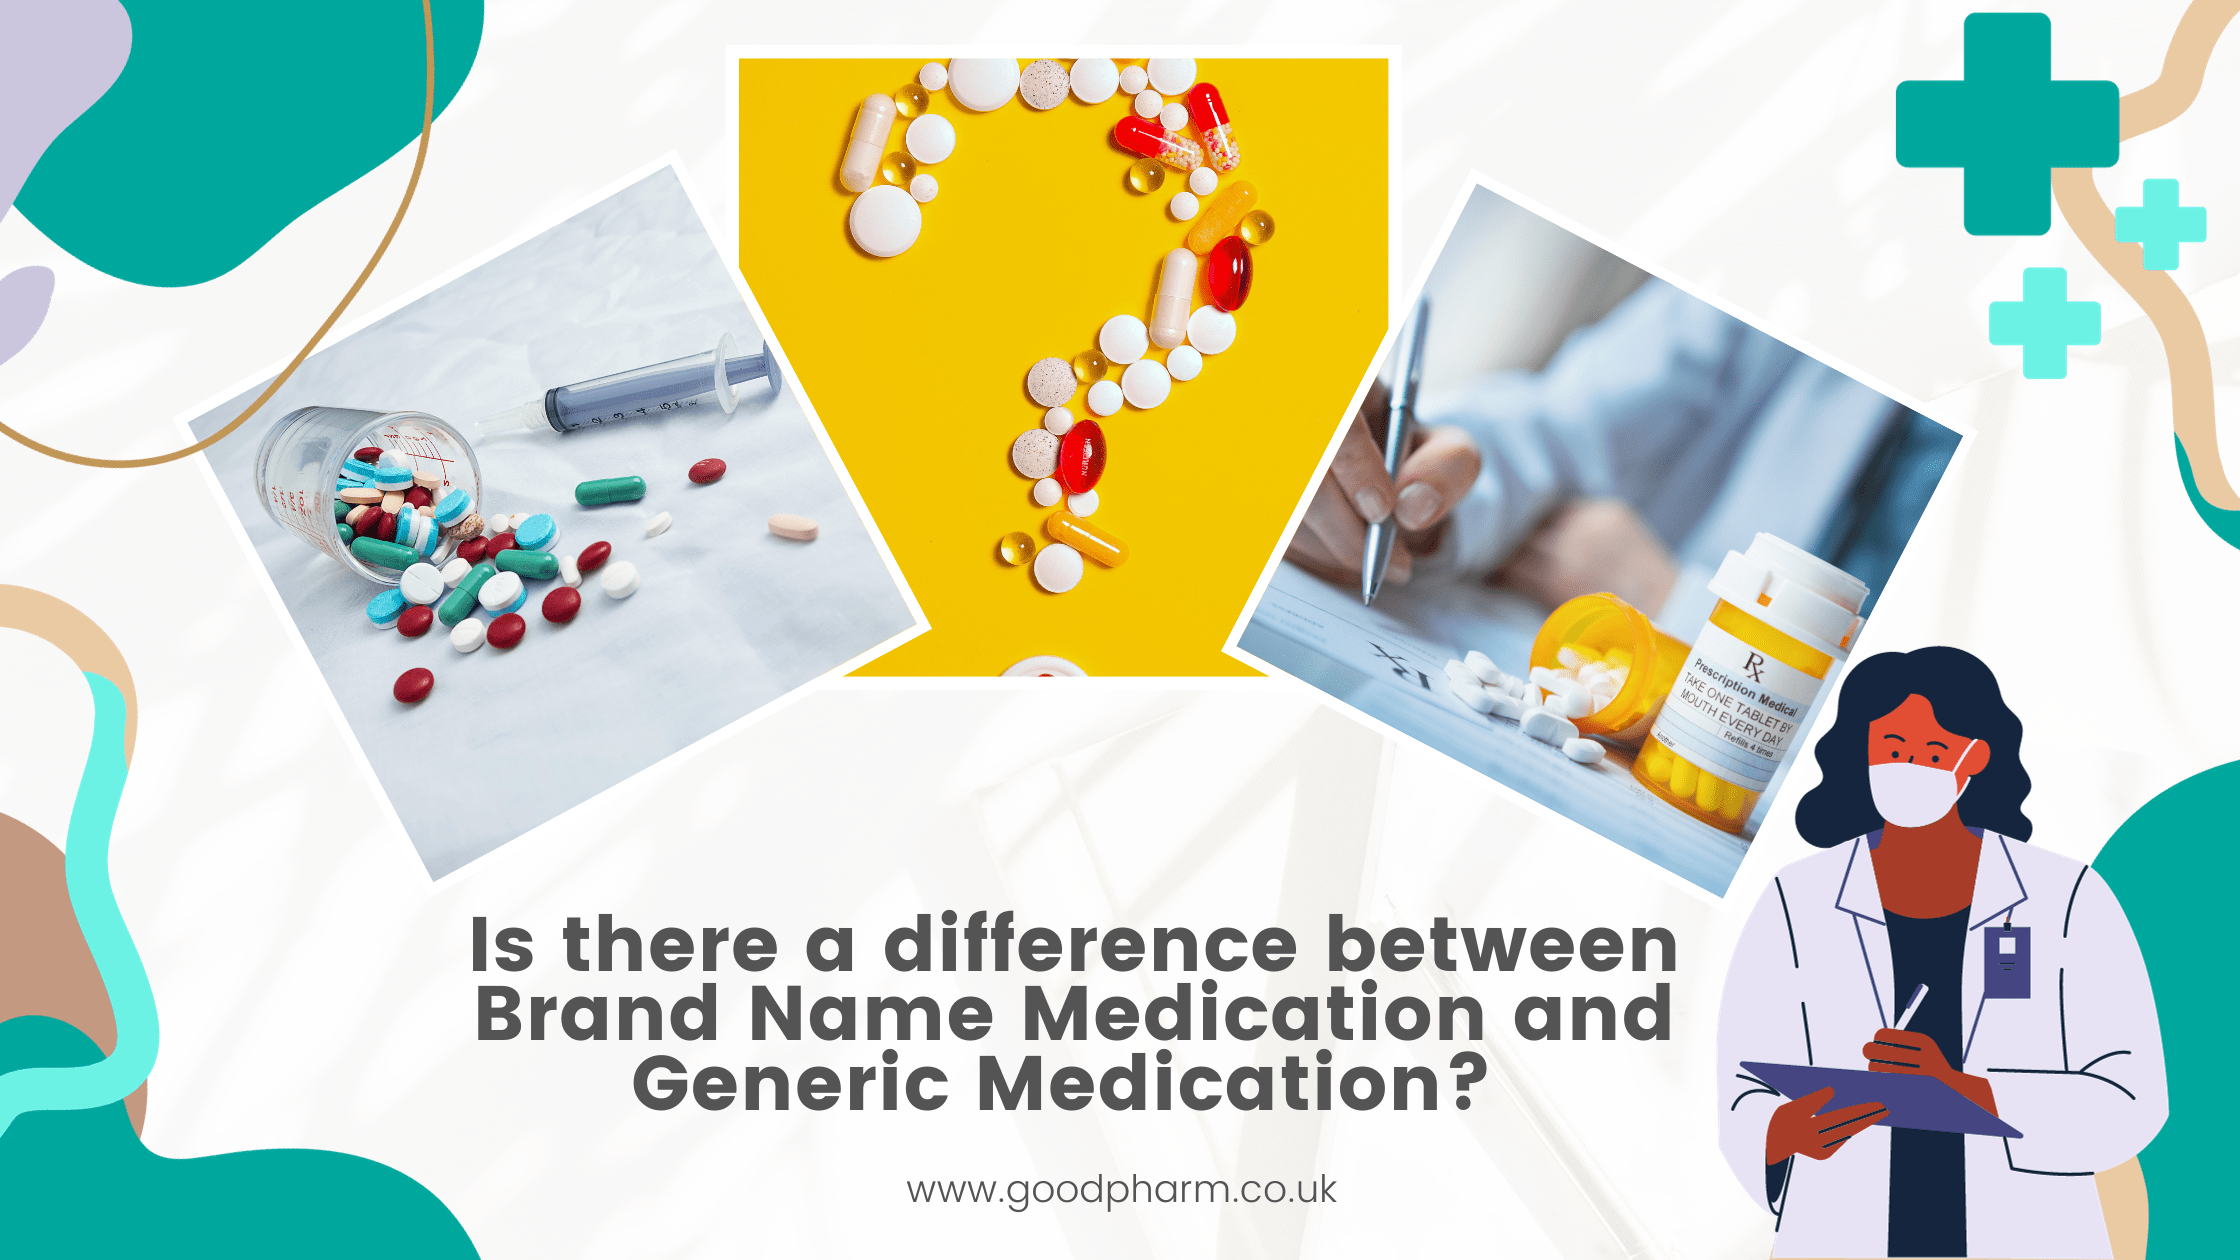 Is there a difference between Brand Name Medication and Generic Medication?